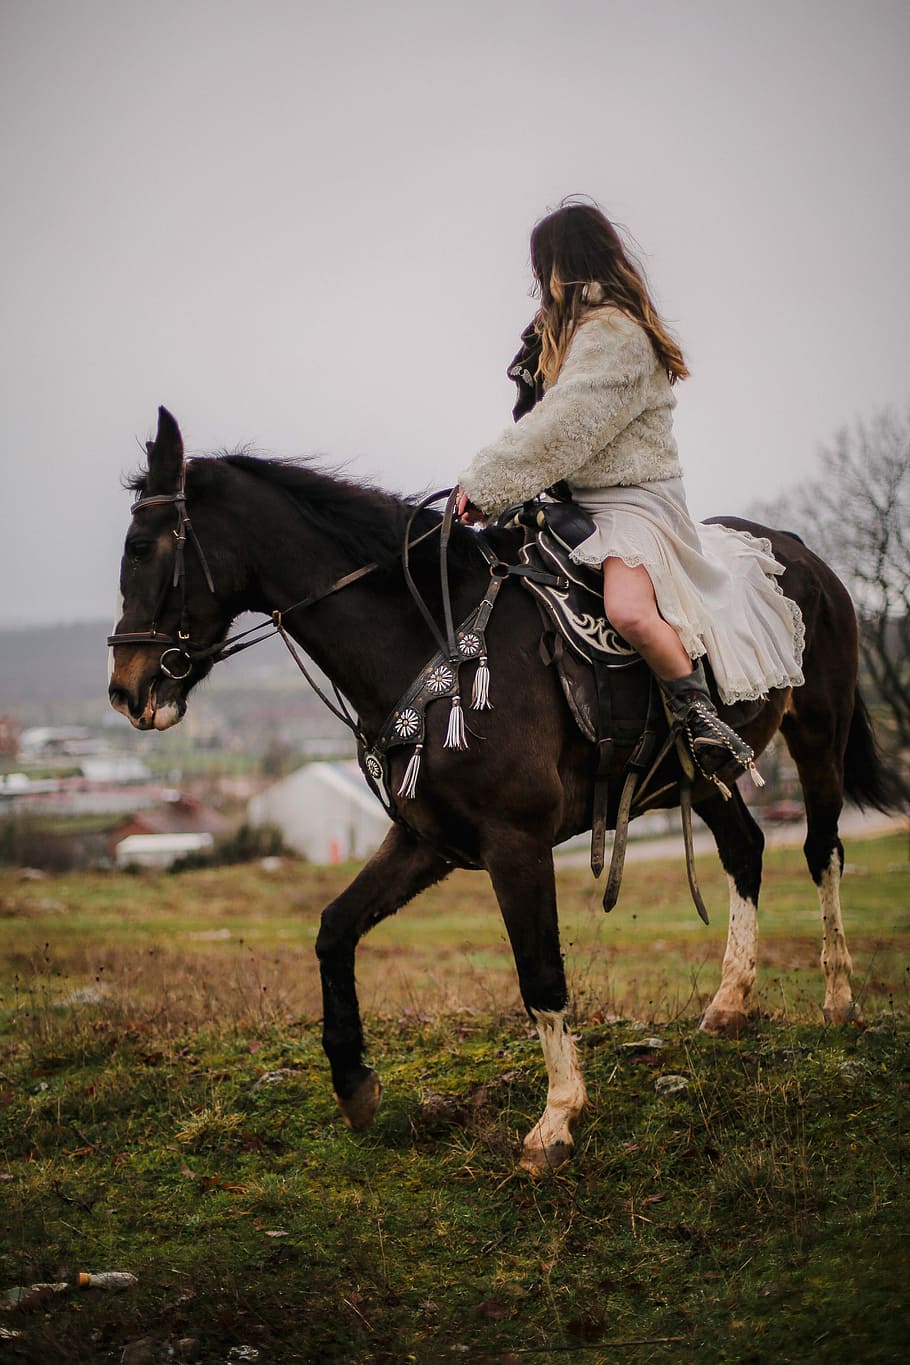 100+ Horse Riding Pictures [HD] | Download Free Images on Unsplash